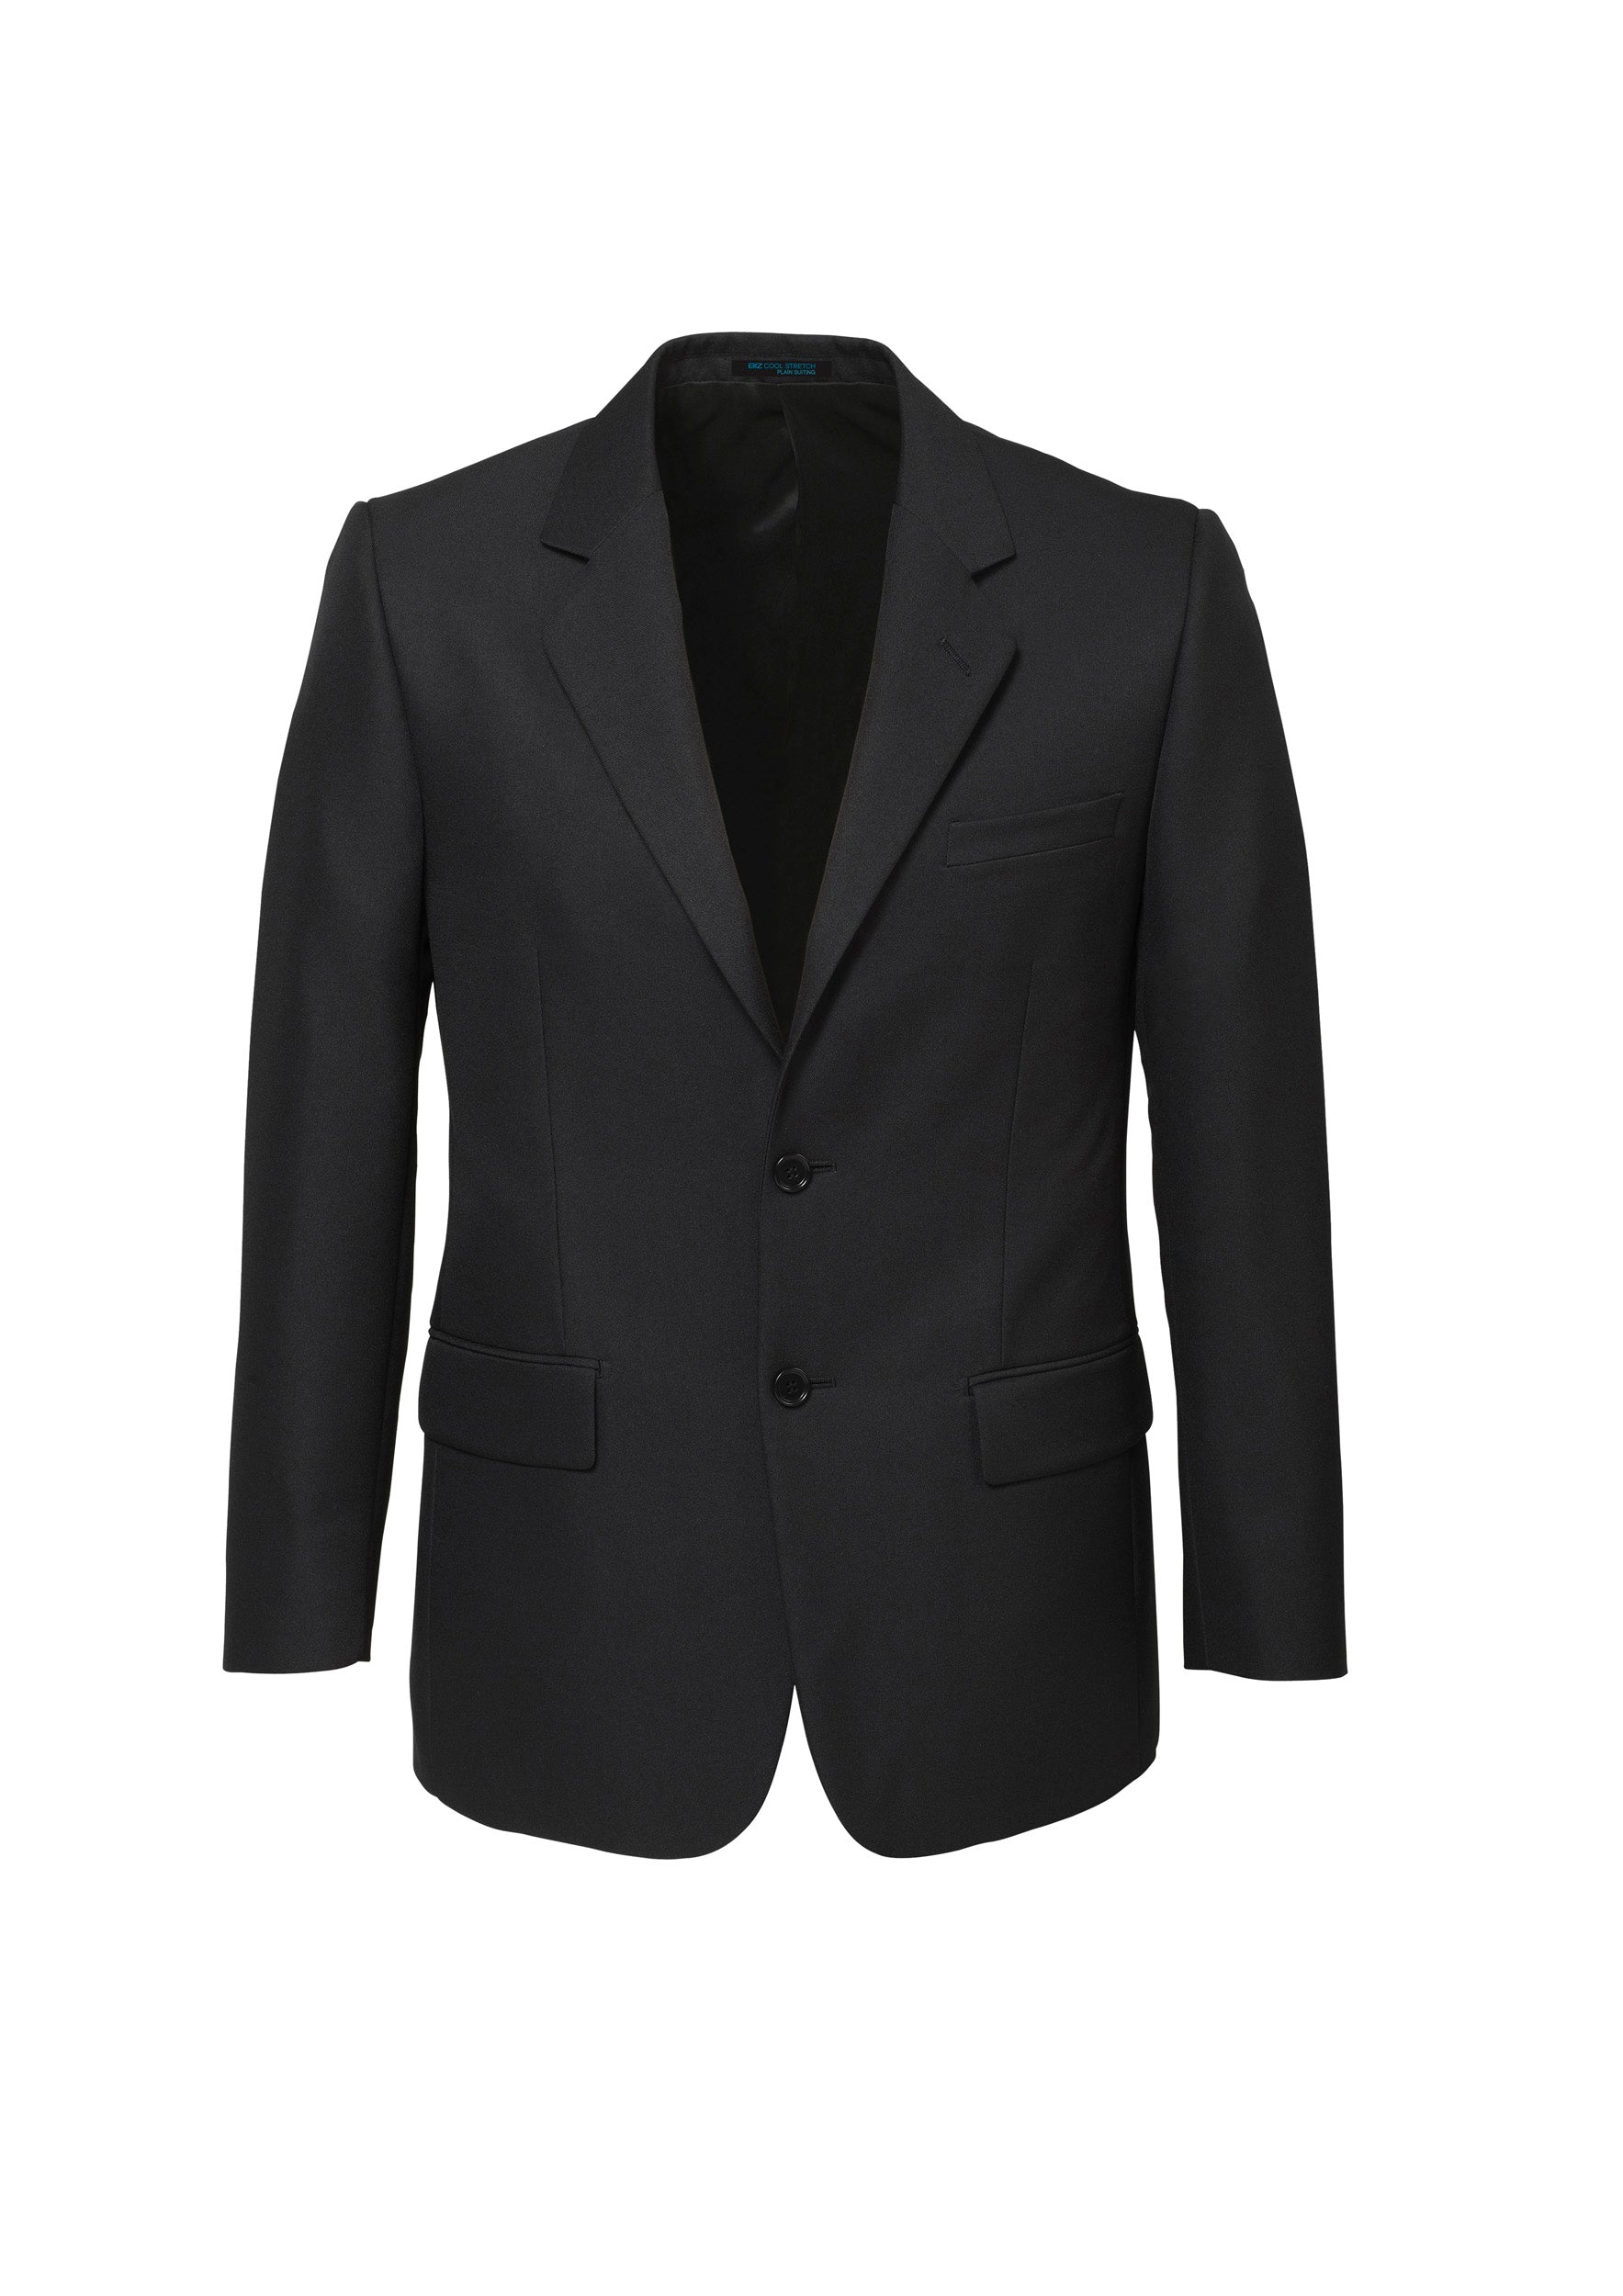 Mens Cool Stretch 2 Button Classic Jacket